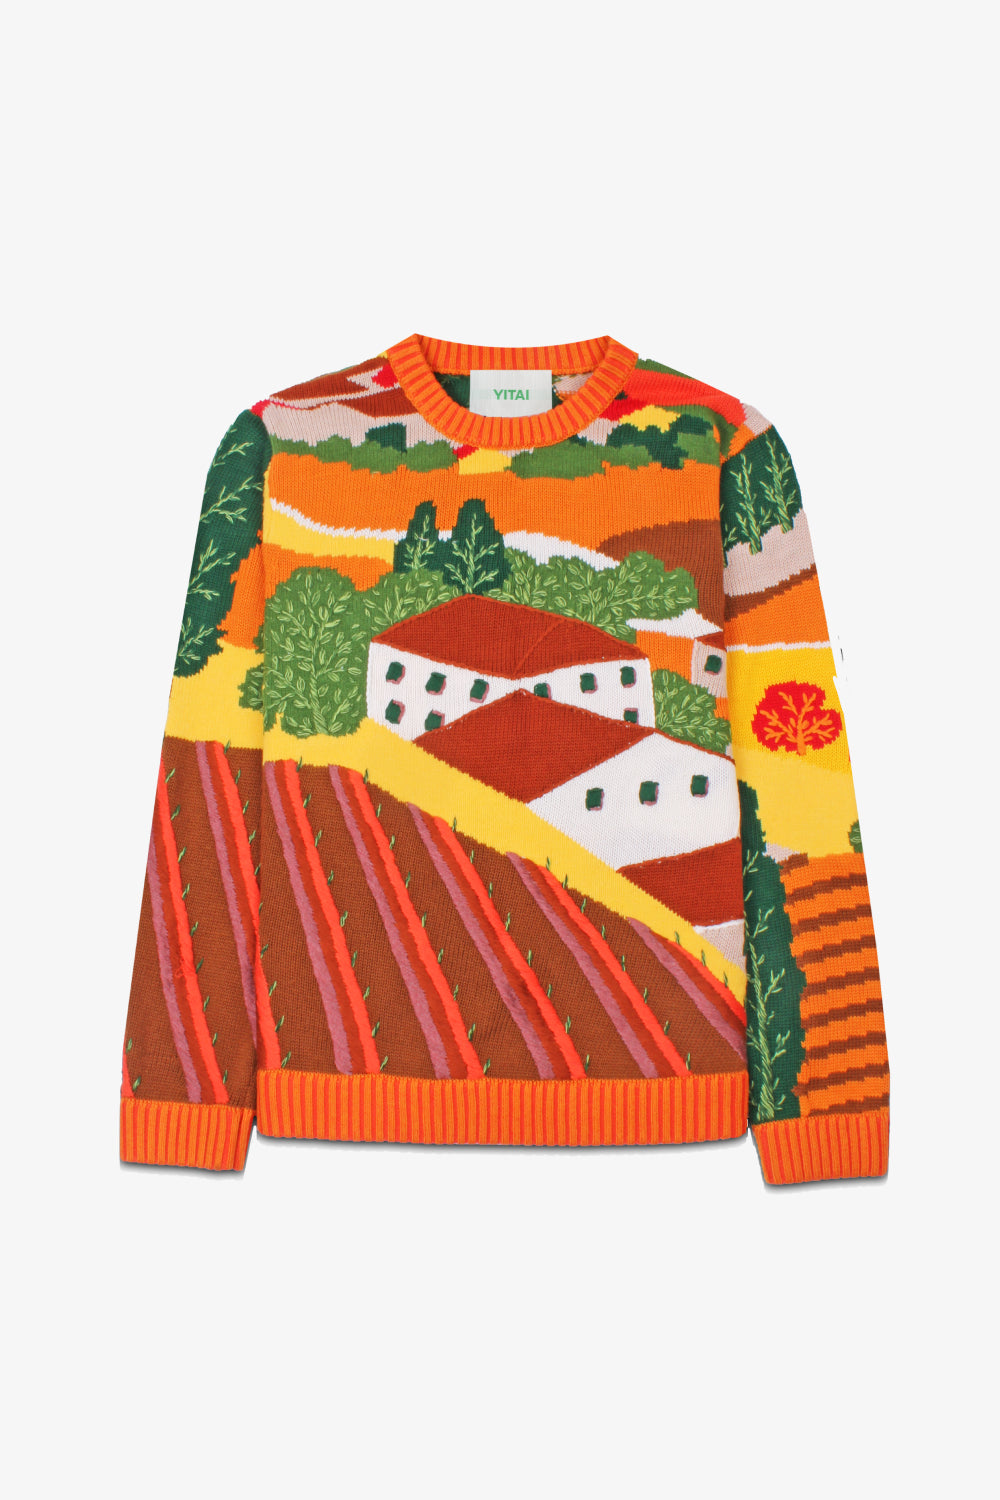 Tuscany Hand Embroidery Sweater